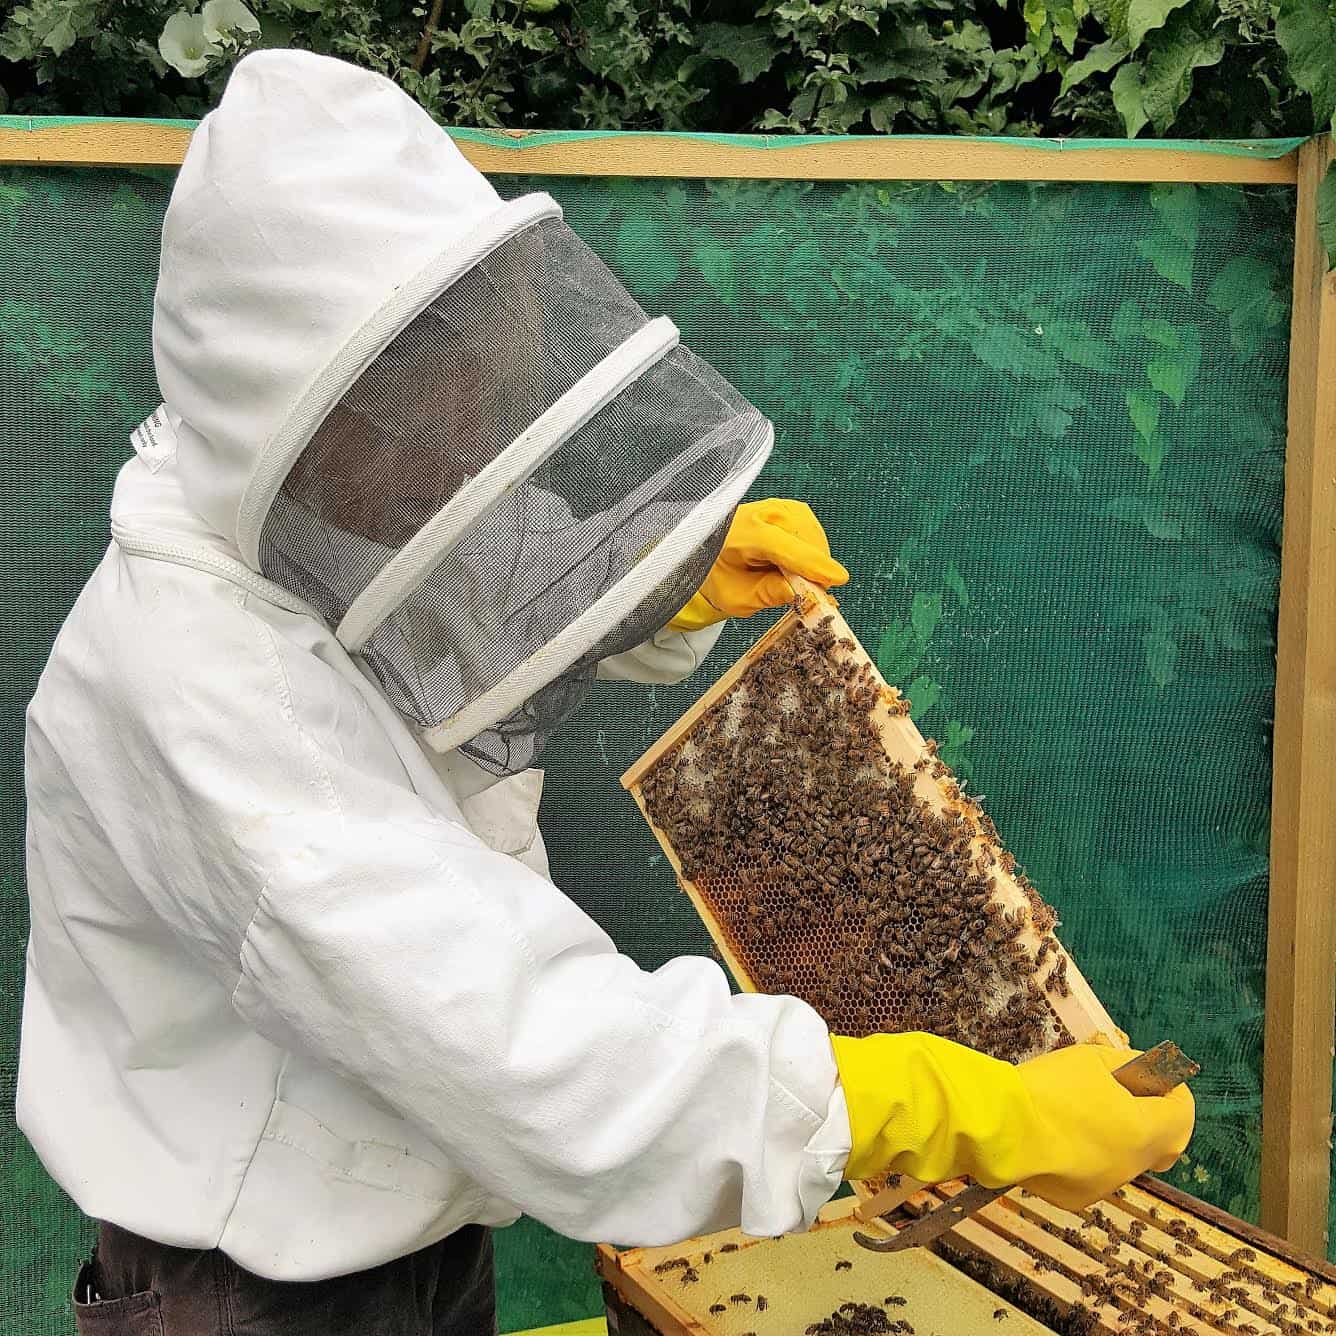 Local beekeepers working to produce honey